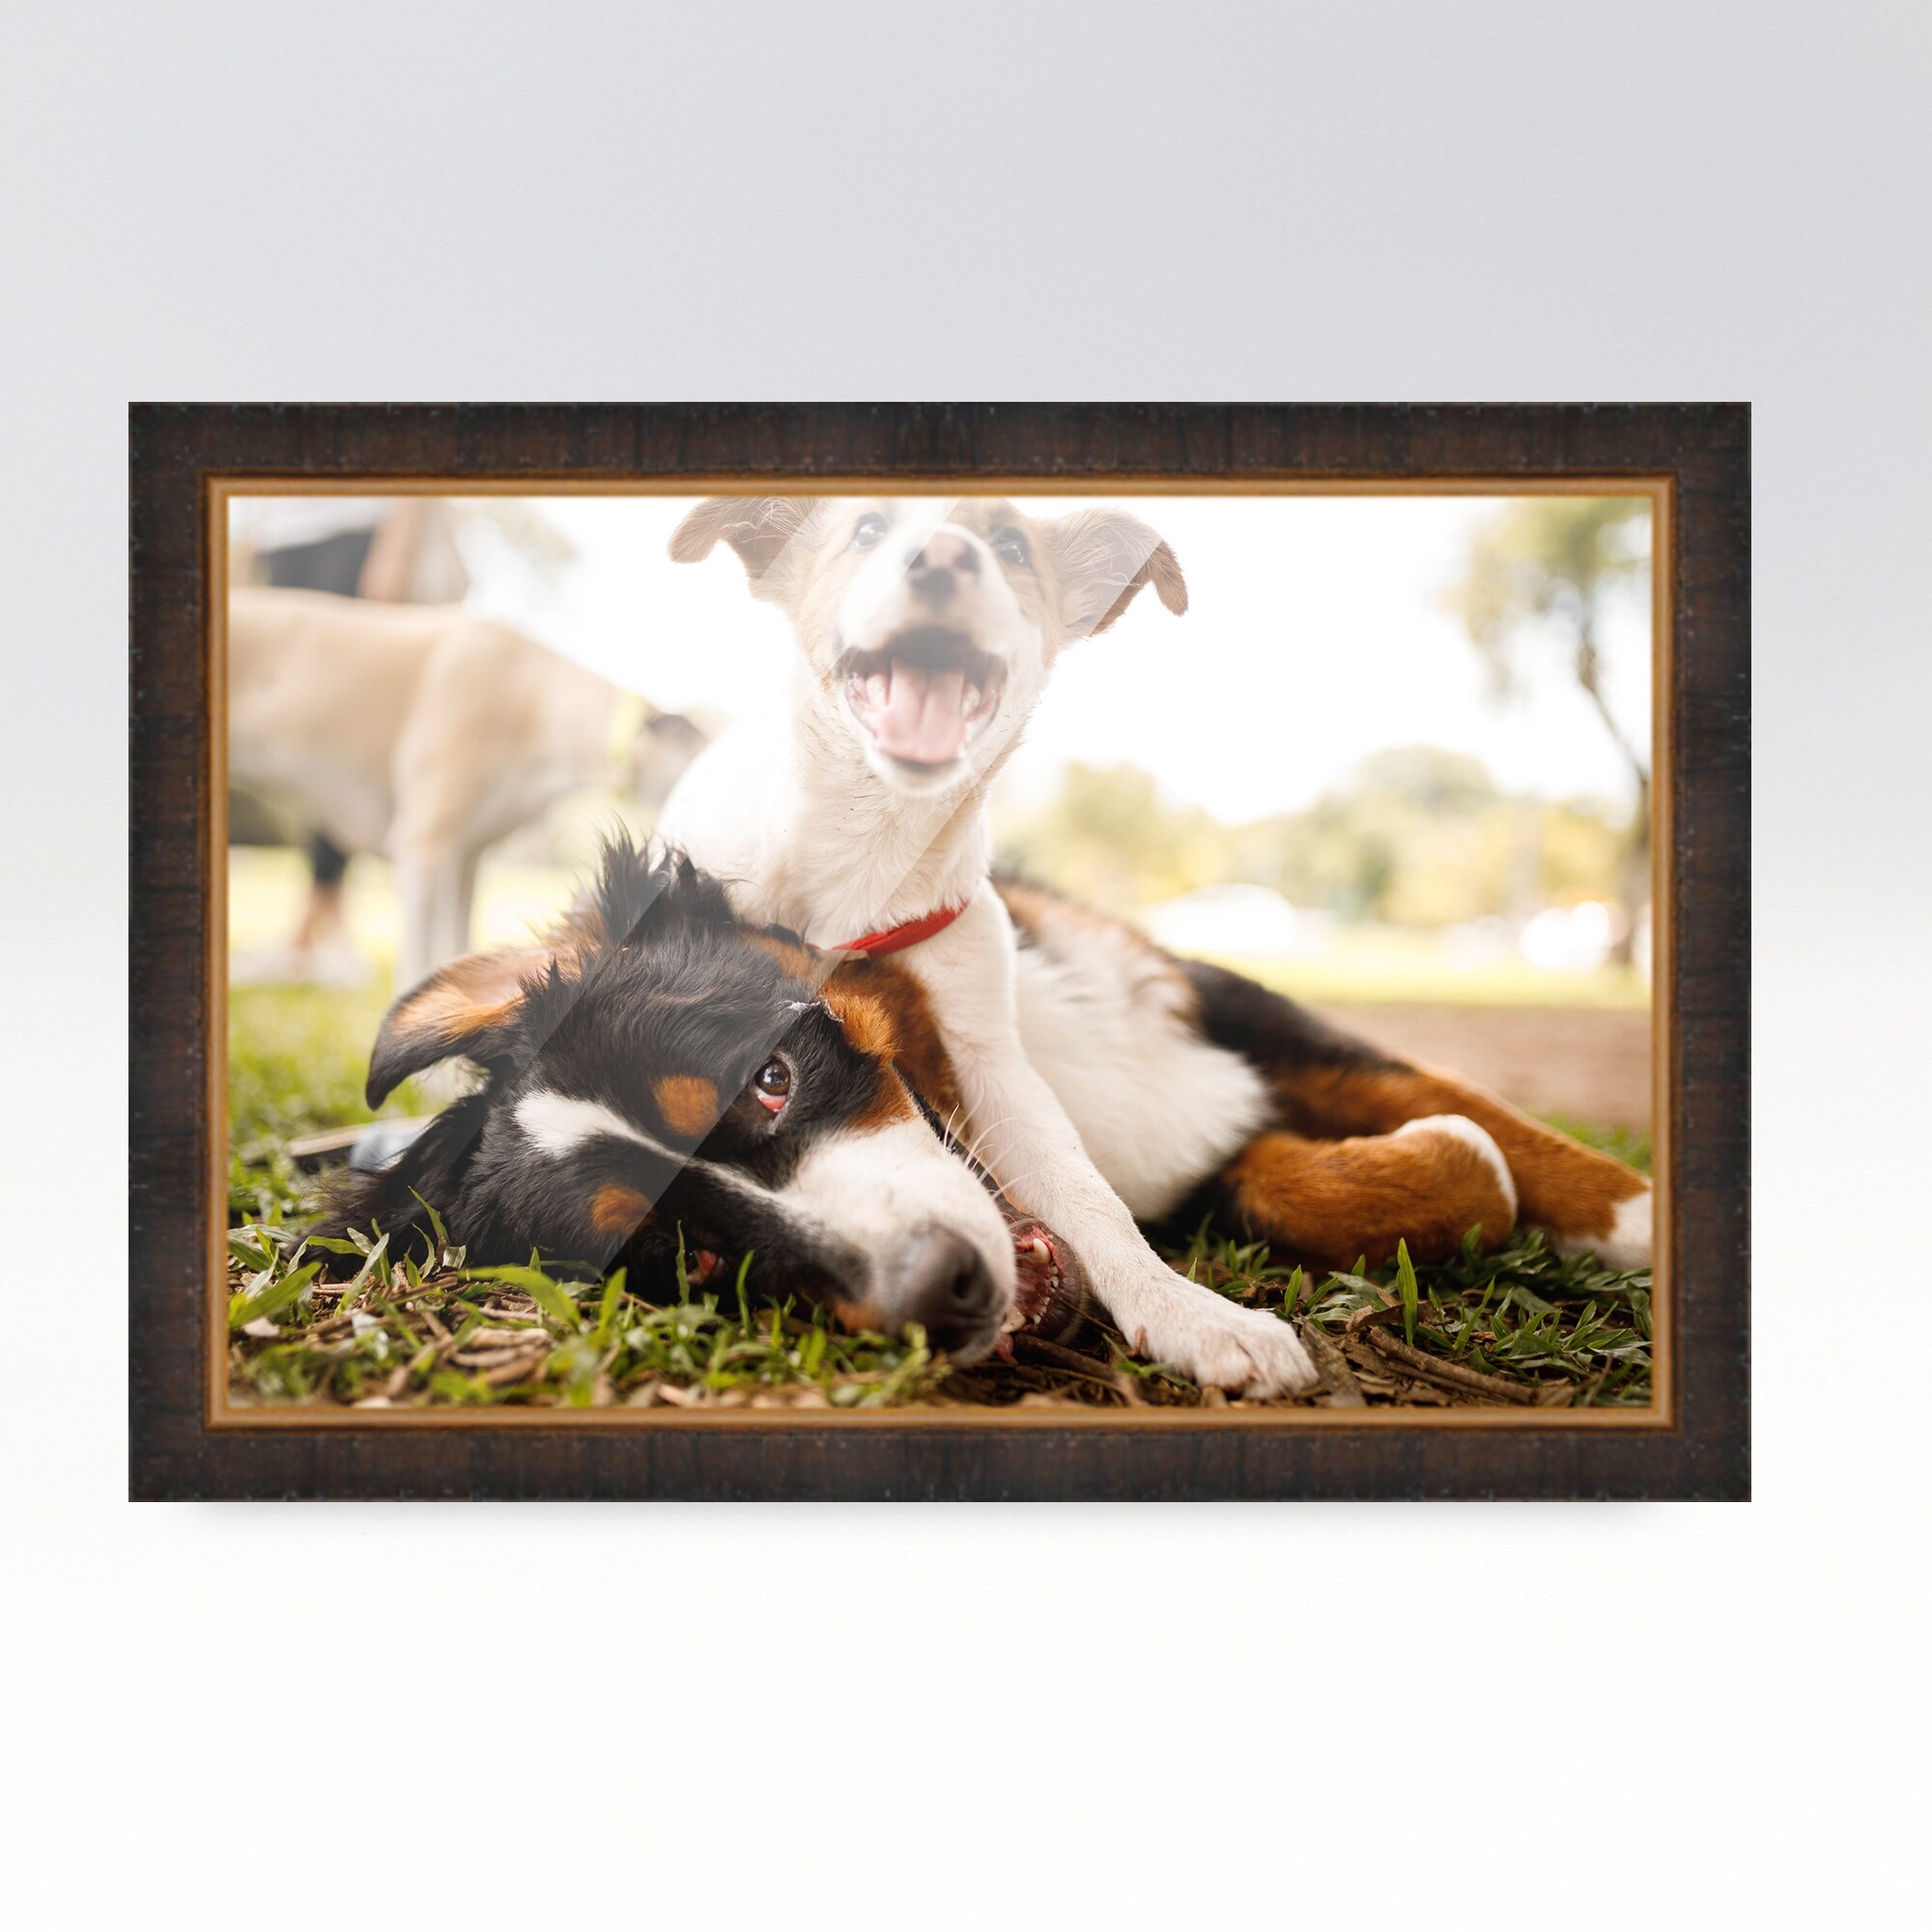 10x20 Traditional Black Complete Wood Picture Frame with UV